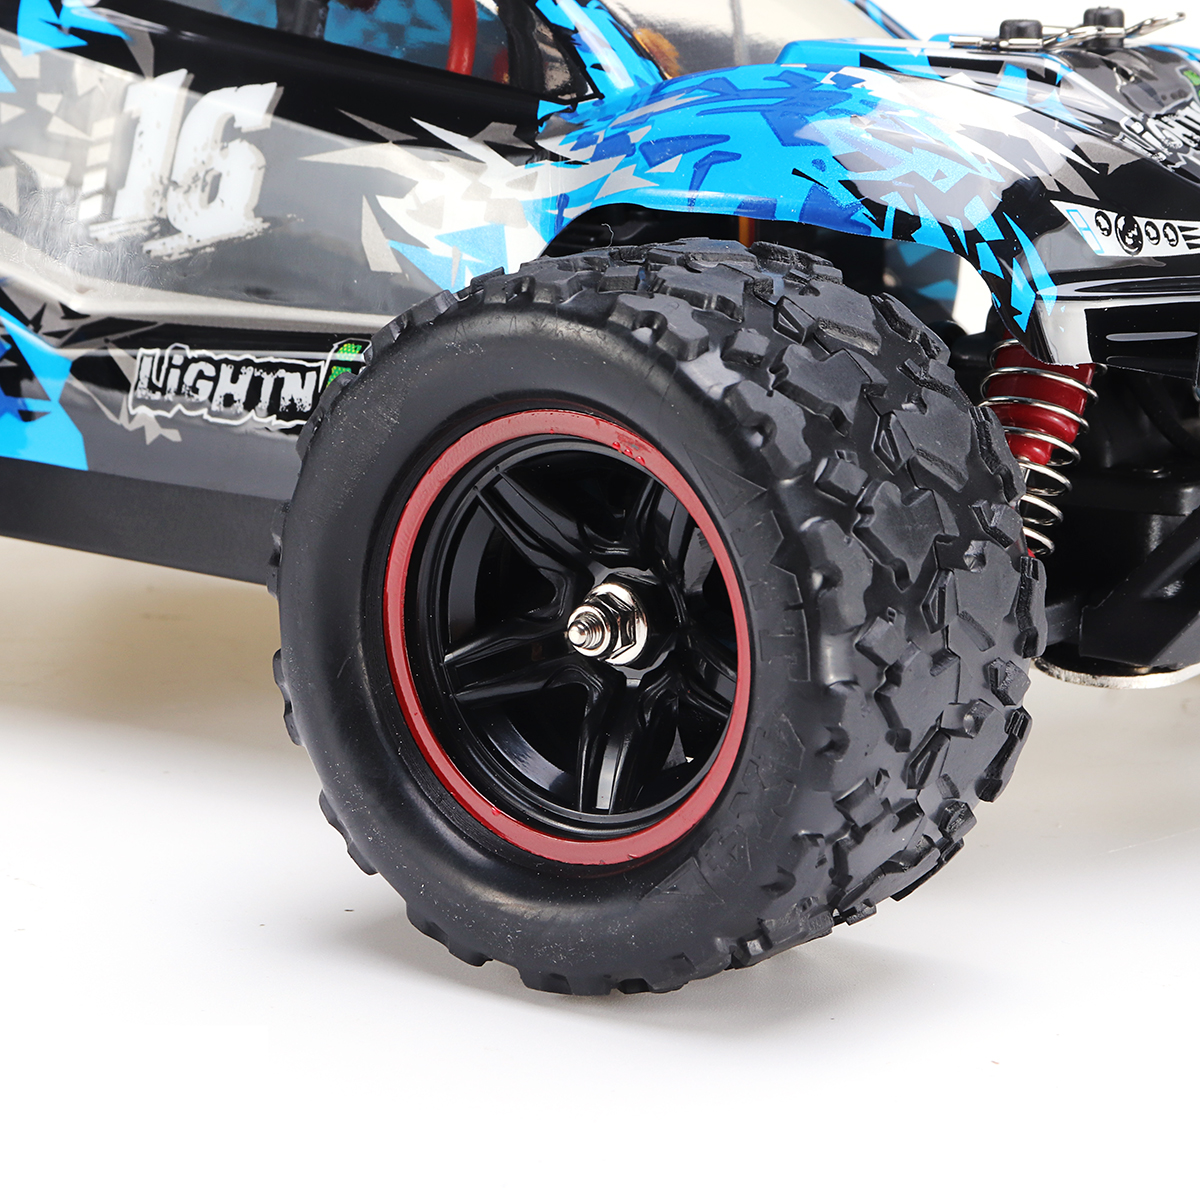 HS 18421 18422 18423 1/18 2.4G Alloy Brushless Off Road High Speed RC Car Vehicle Models Full Proportional Control - Photo: 10